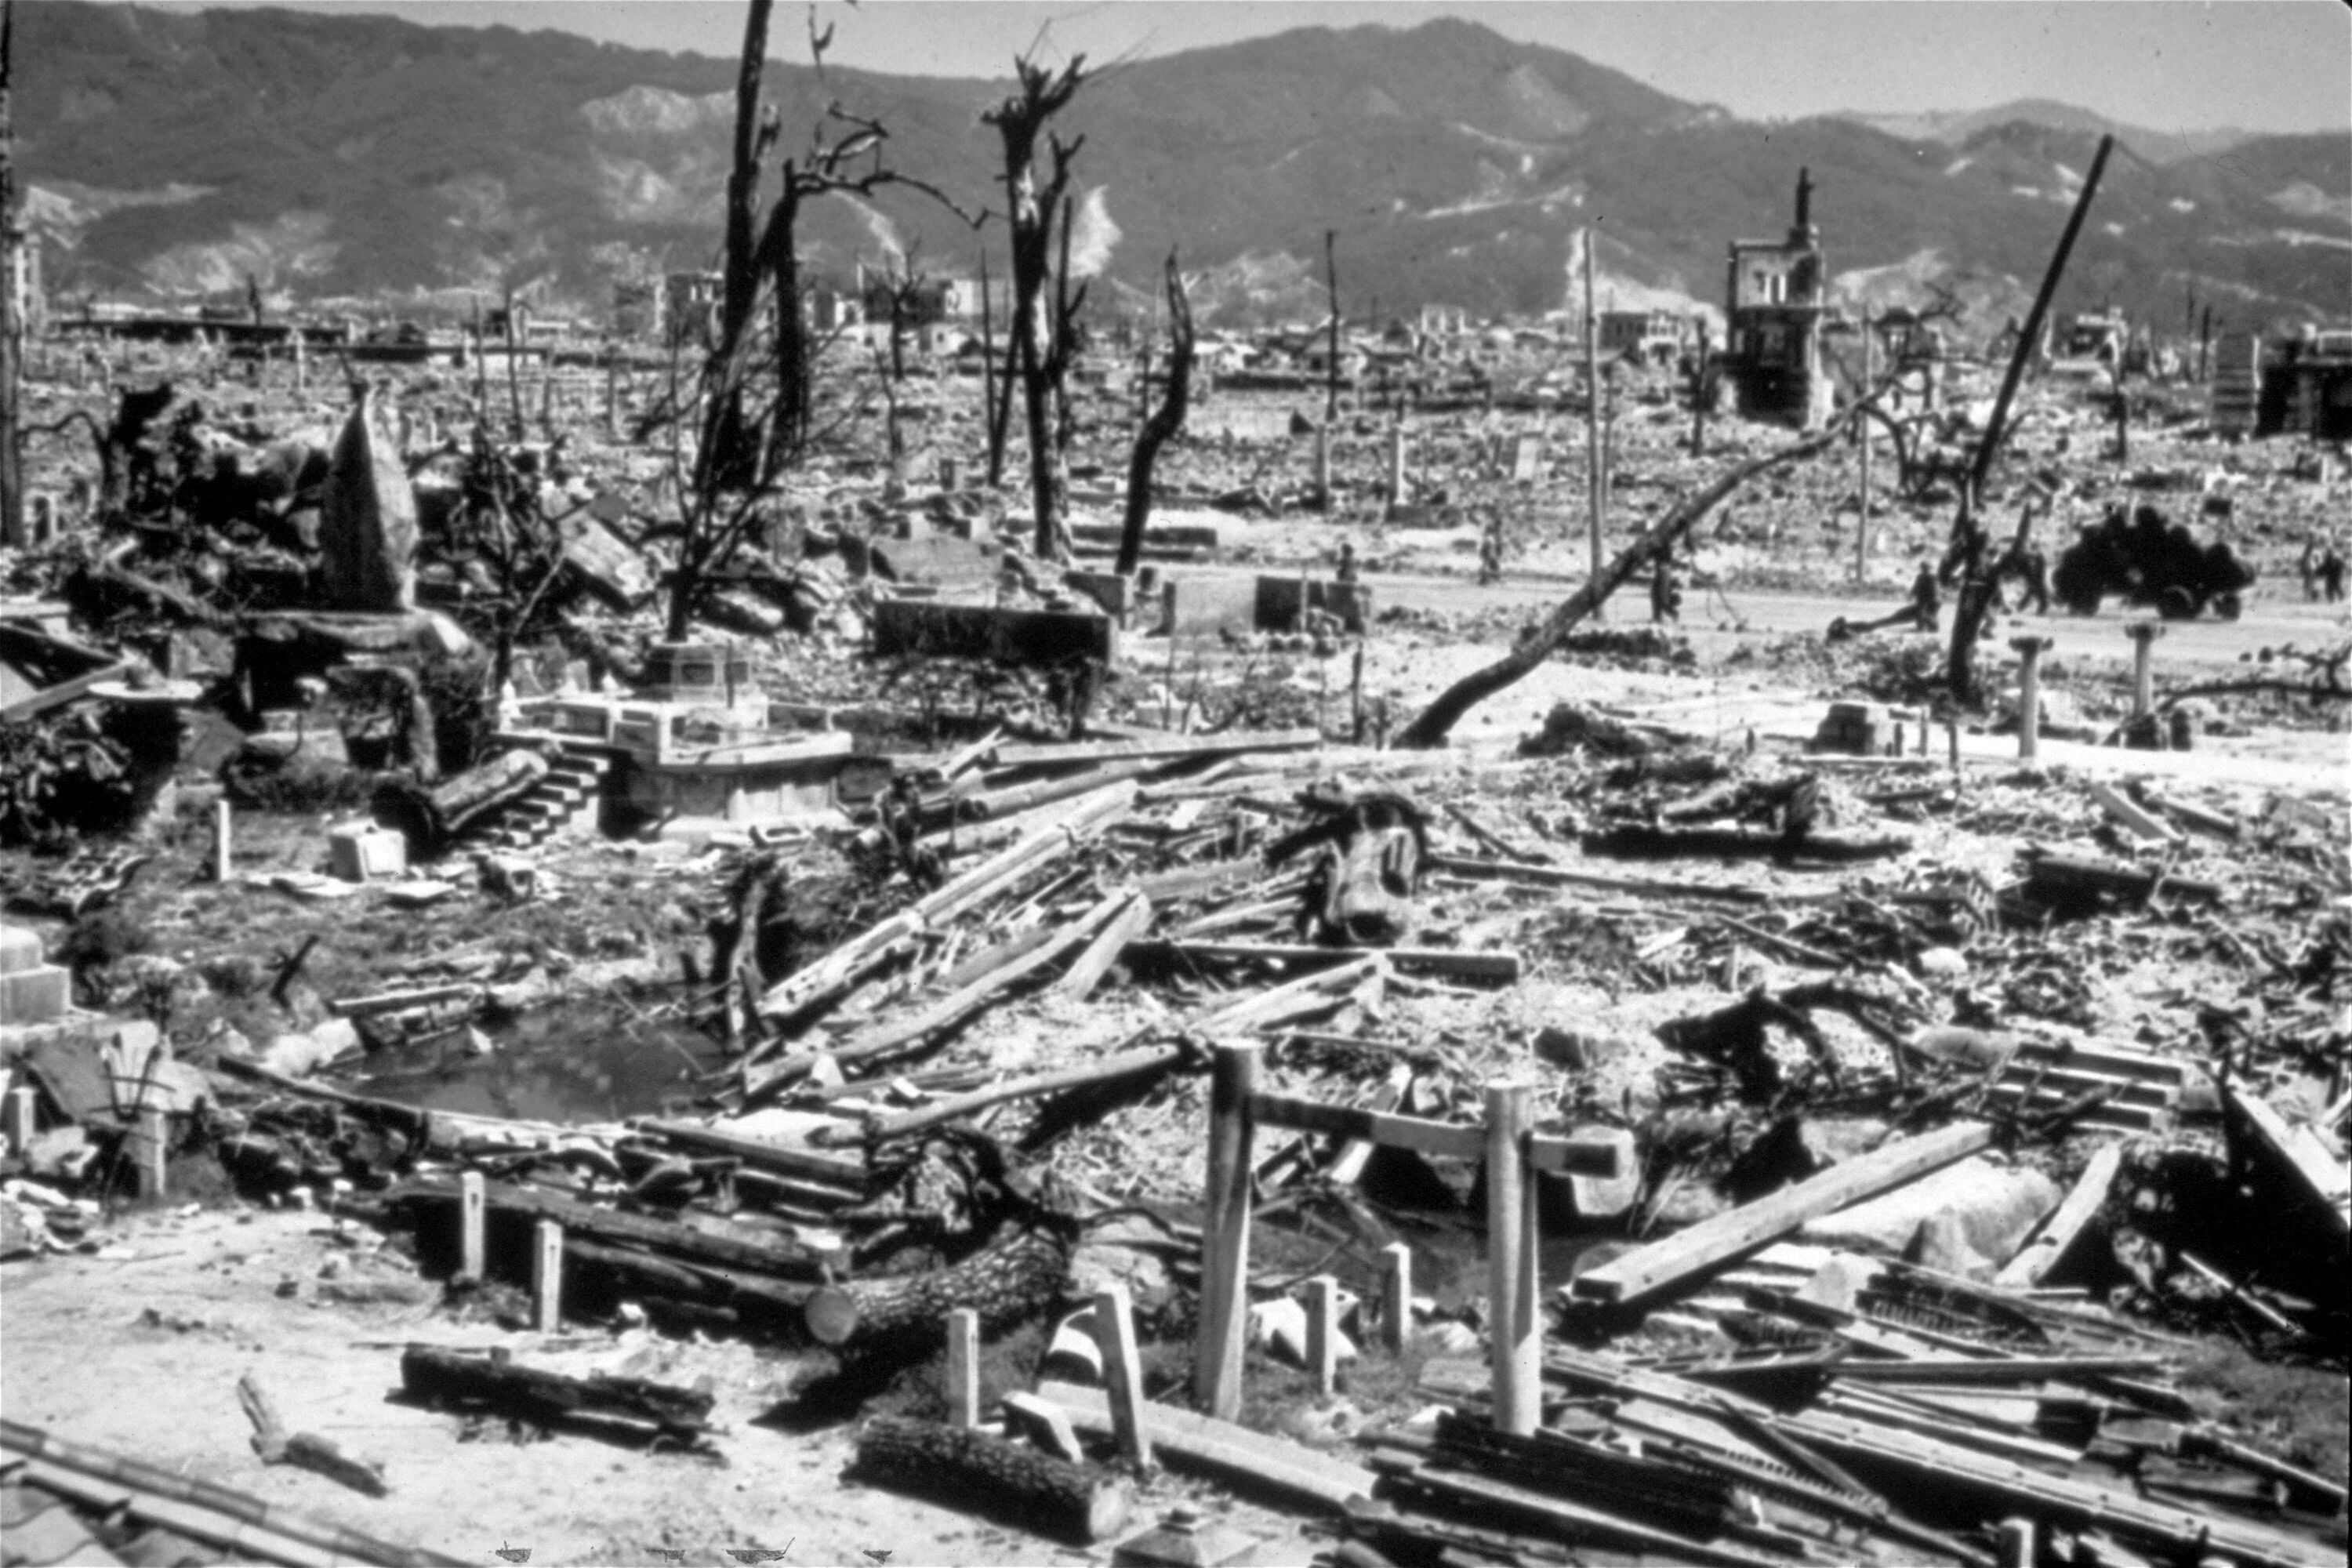 FILE - This Aug. 6, 1945 file photo,  shows the destruction from the explosion of an atomic bomb in Hiroshima, Japan. The 70th anniversary of the atomic bombings of Hiroshima and Nagasaki are being marked with memorial services, peace concerts and art exhibits. More than 200,000 people died in the two blasts, which were the first wartime uses of nuclear weapons and which led to Japans surrender and the end of World War II. (AP Photo, File)